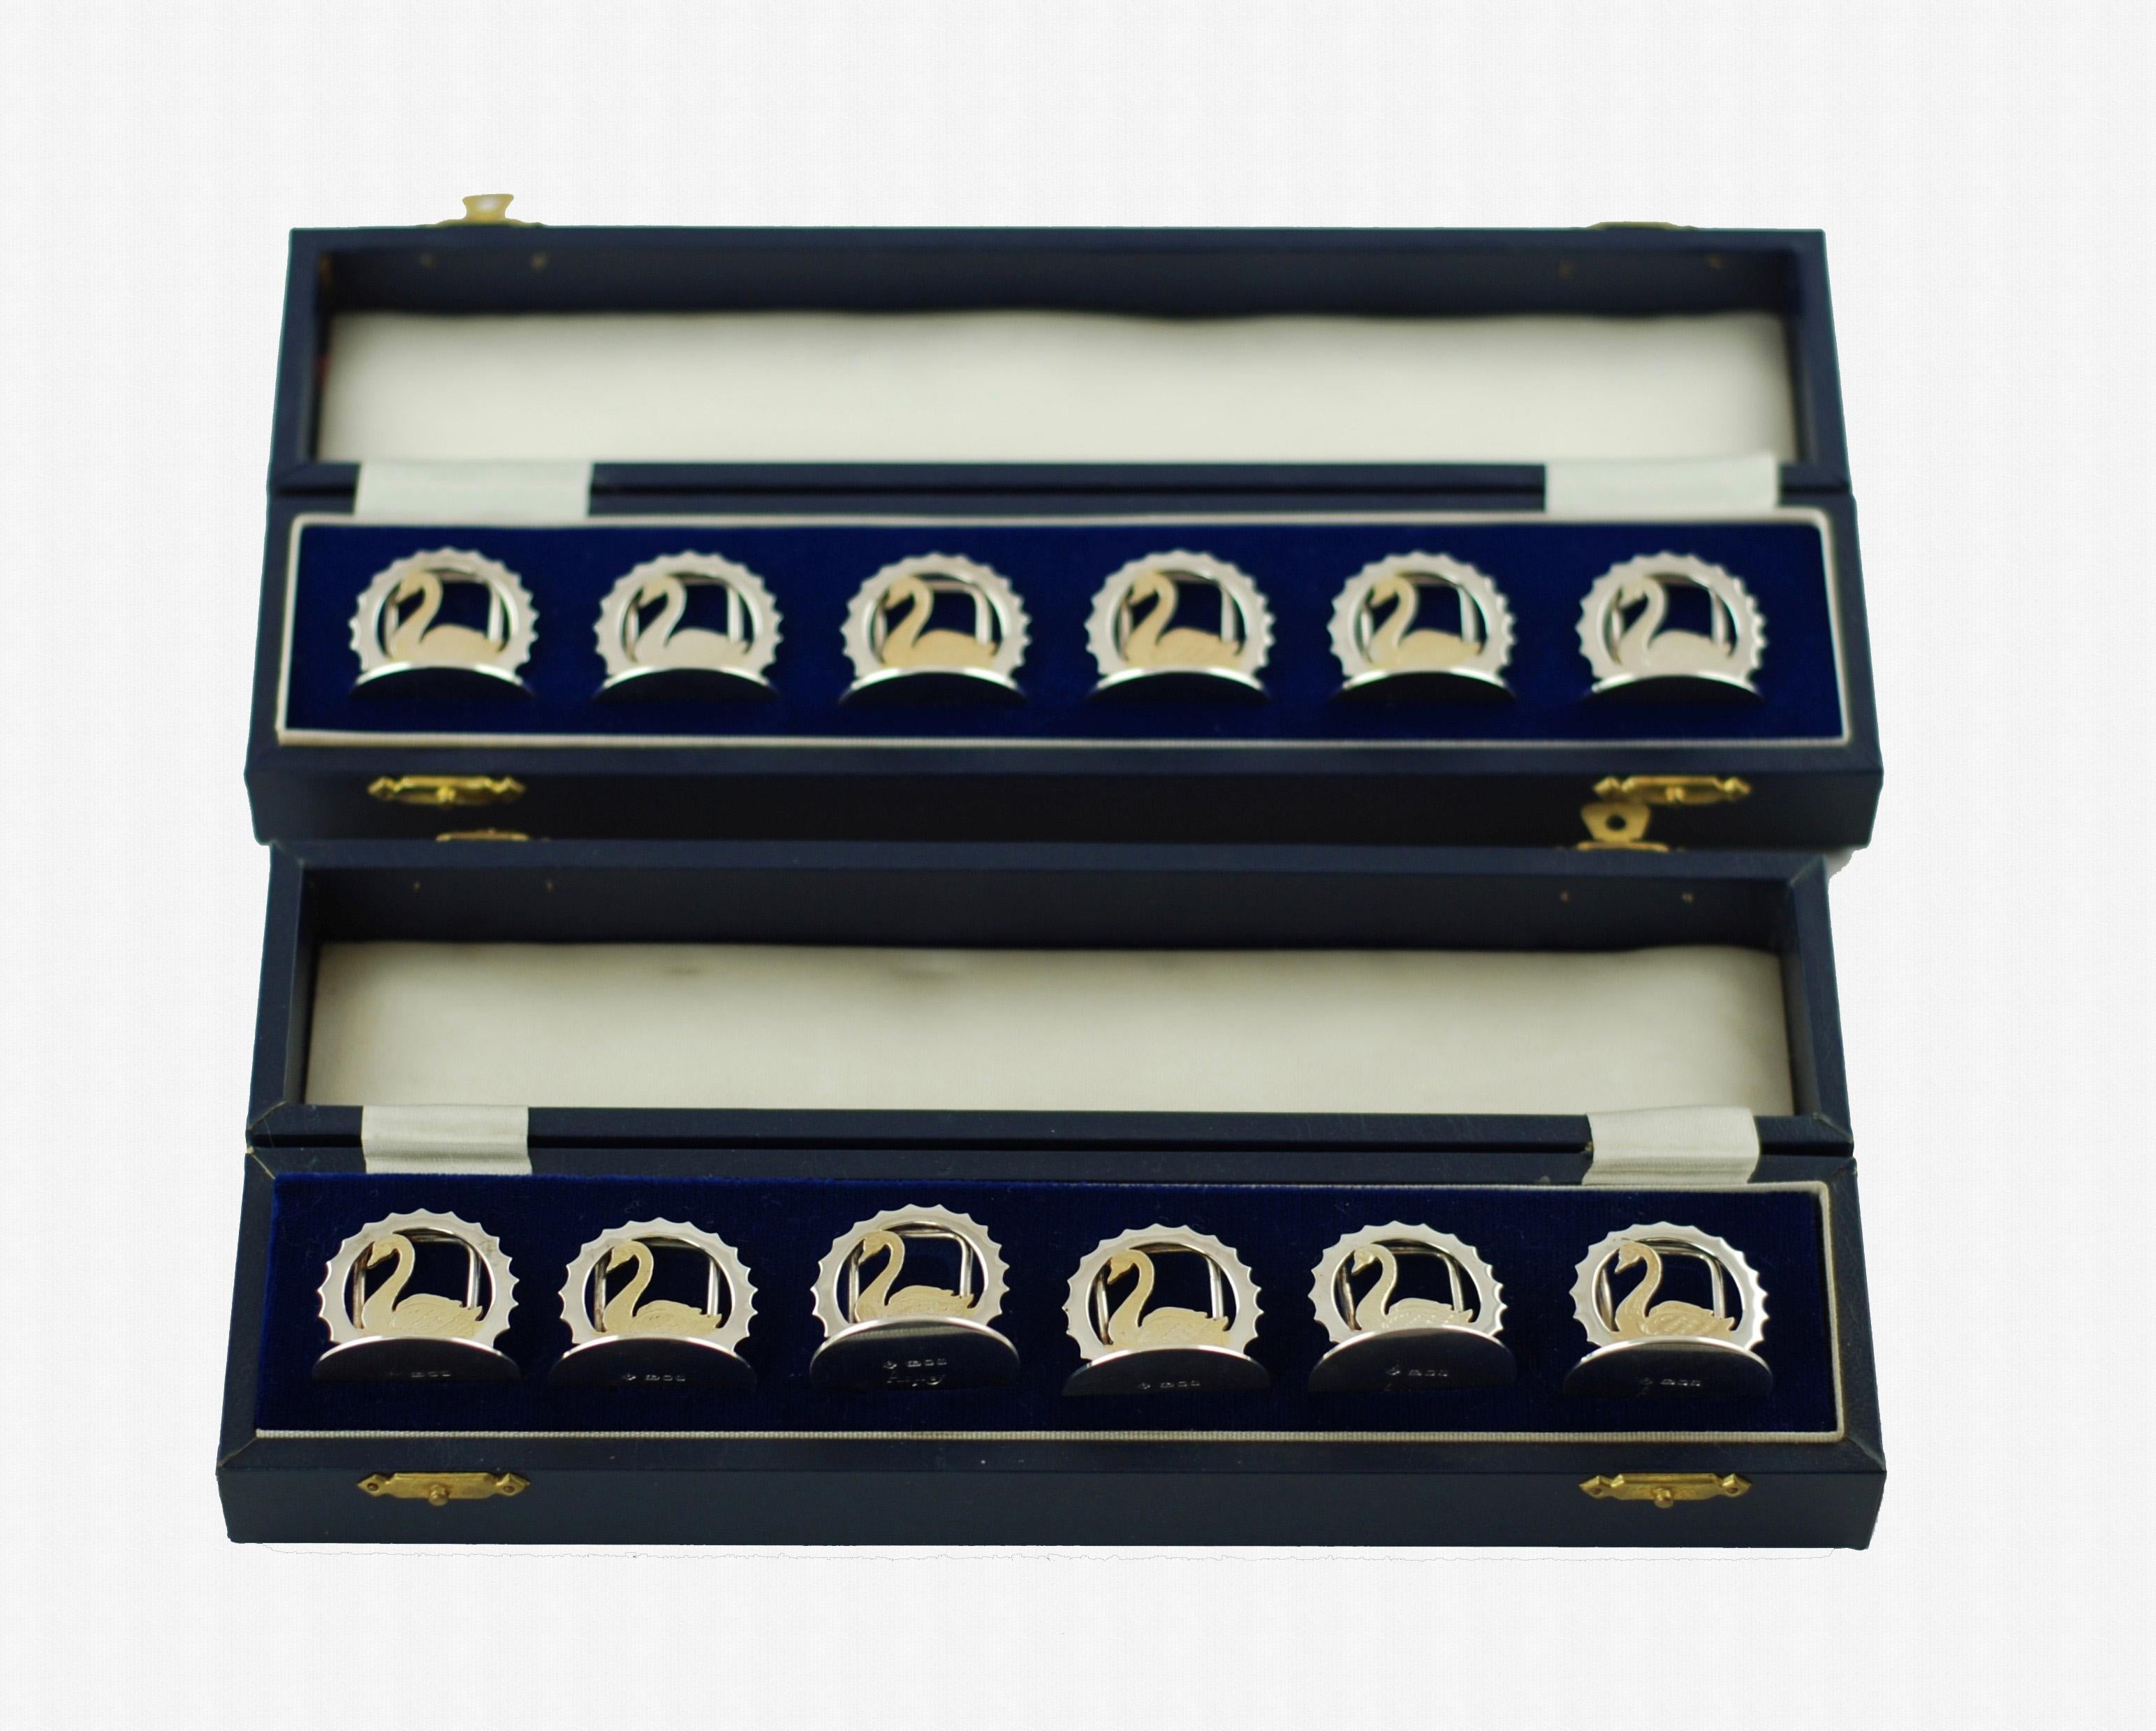 This elegant set of 12 sterling silver menu place card holders was made by Asprey of London. The pieces have circular bases surmounted with arched menu place card supports and feature swans in profile which have been accented in vermeil. The swans